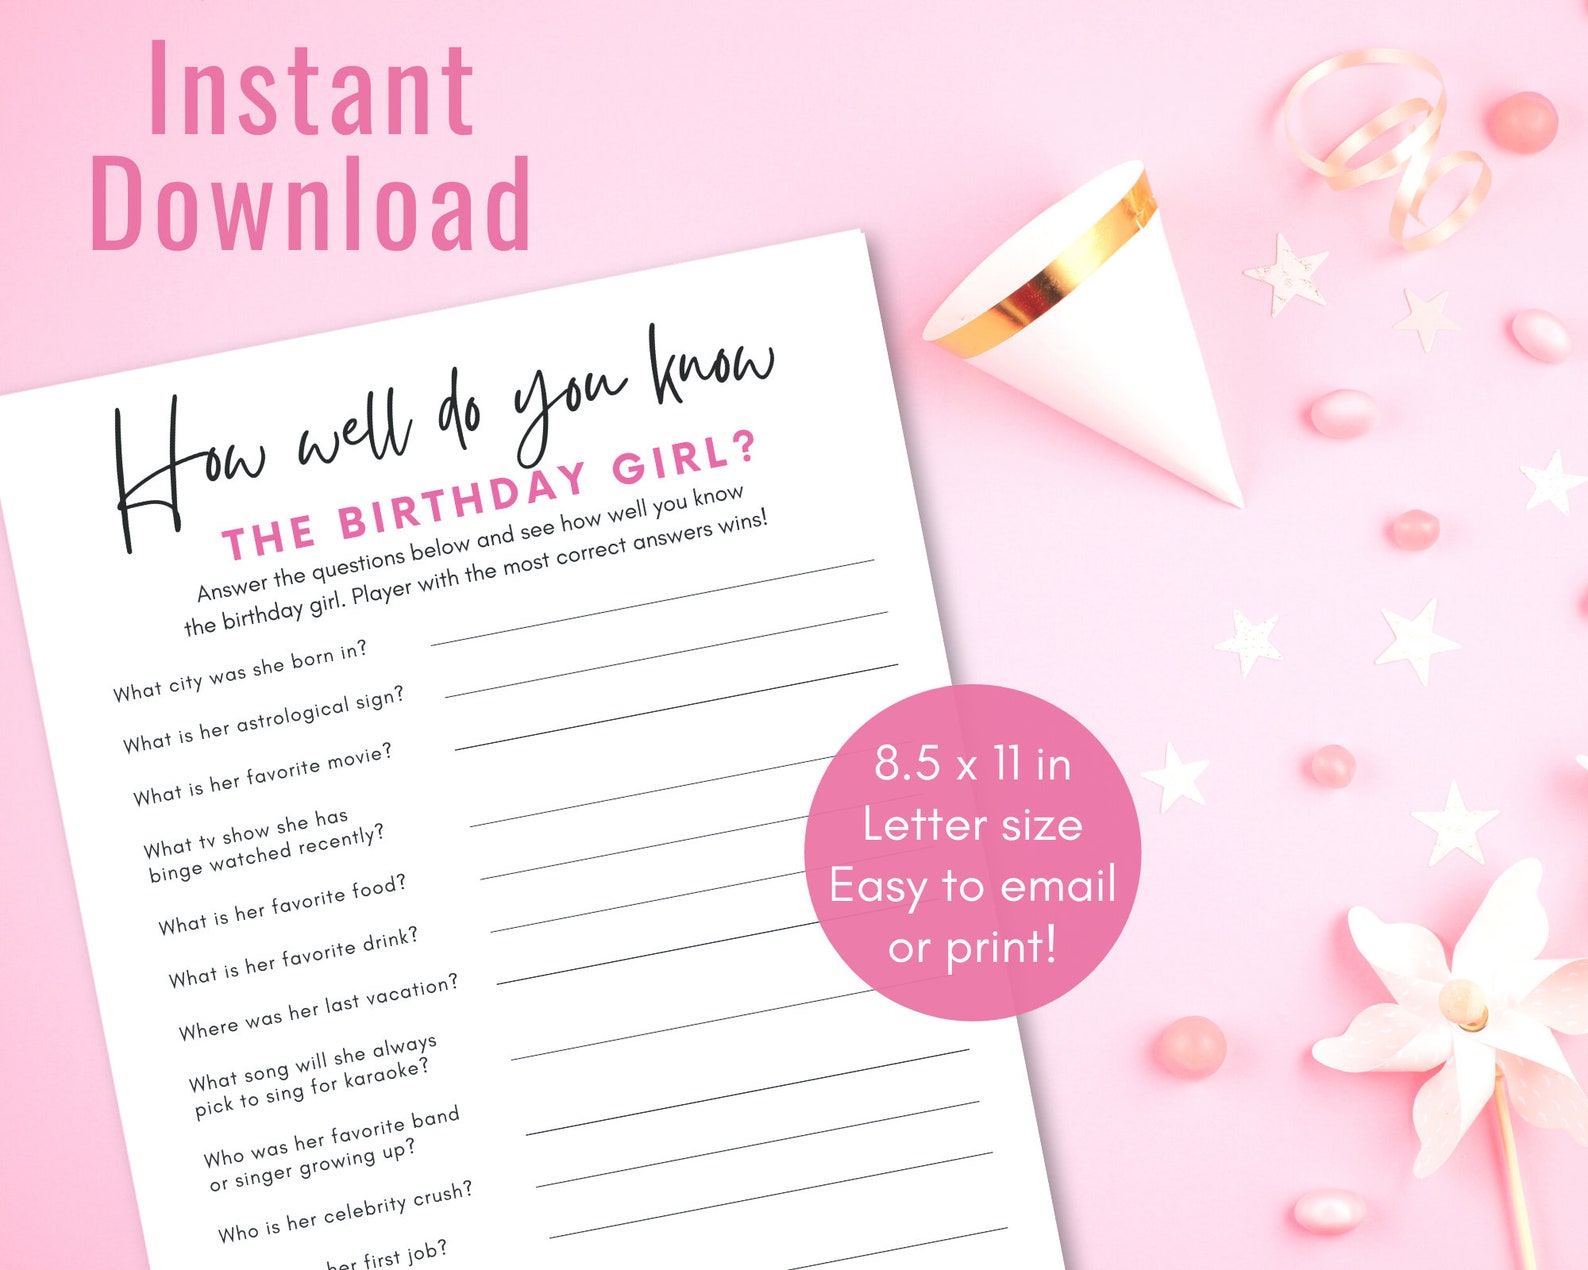 How Well Do You Know the Birthday Girl Game Adult Birthday | Etsy